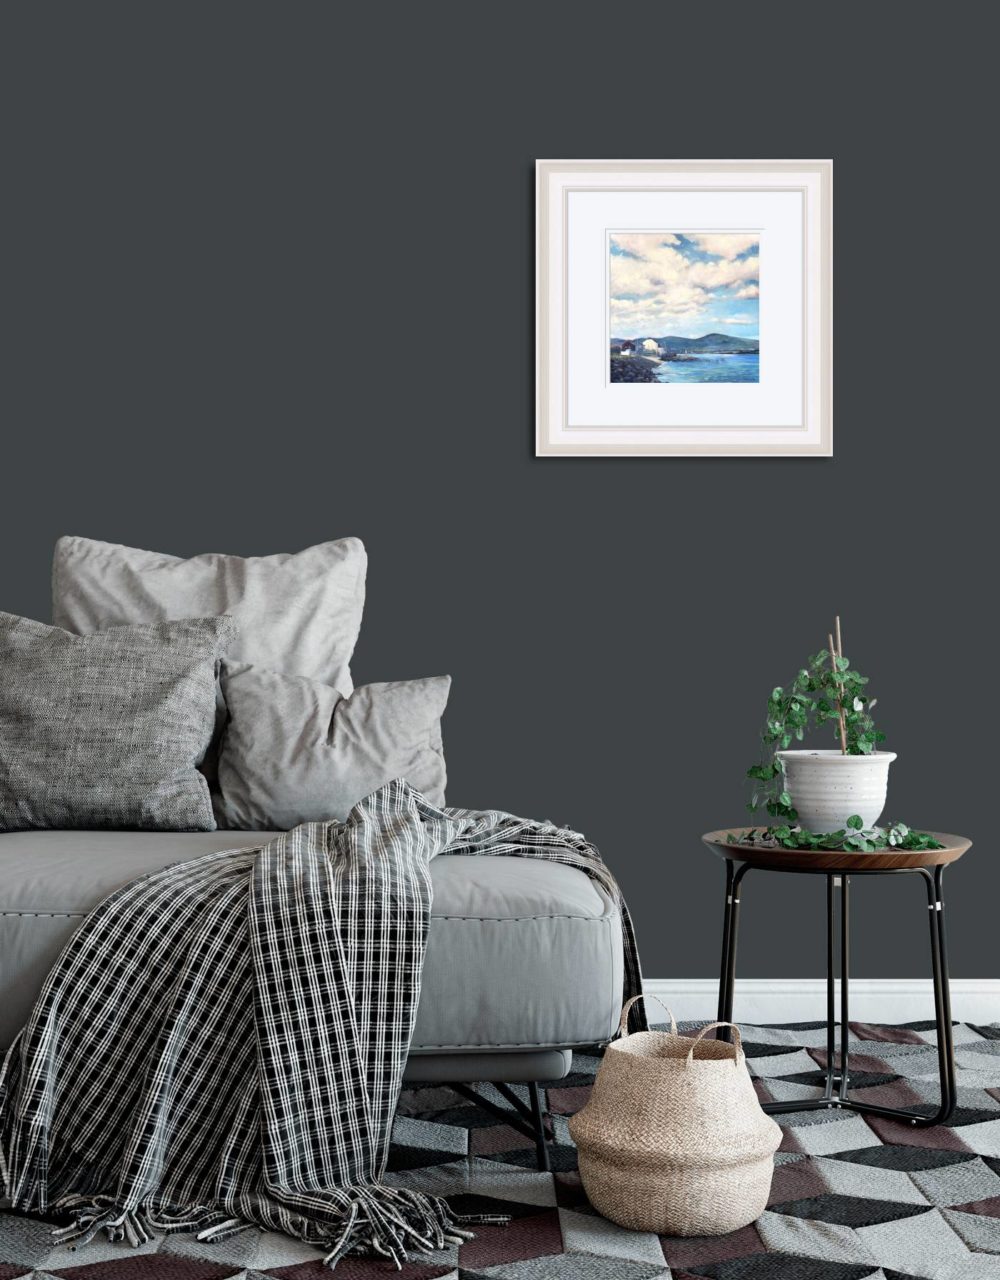 Holywood Old Pier Print (Medium) In White Frame In Room